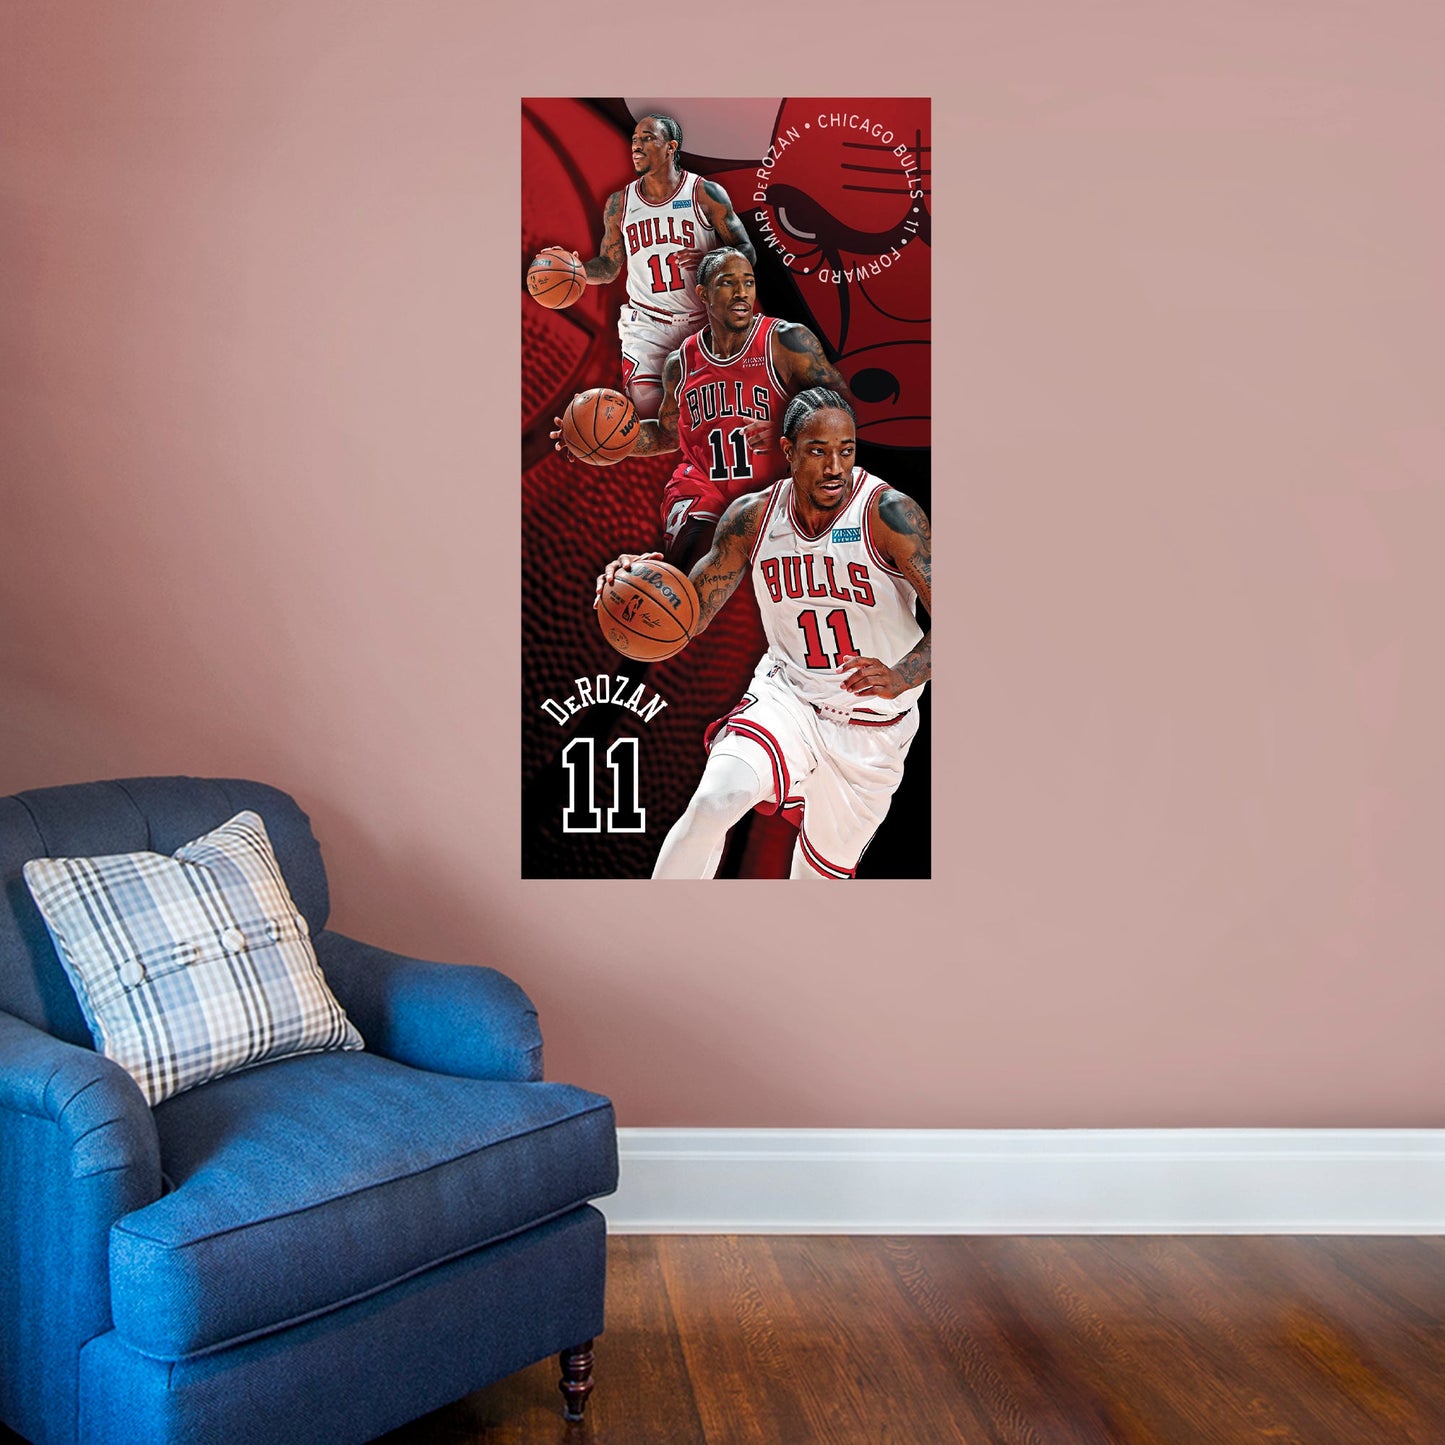 Chicago Bulls: Demar DeRozan Artistic Poster - Officially Licensed NBA Removable Adhesive Decal